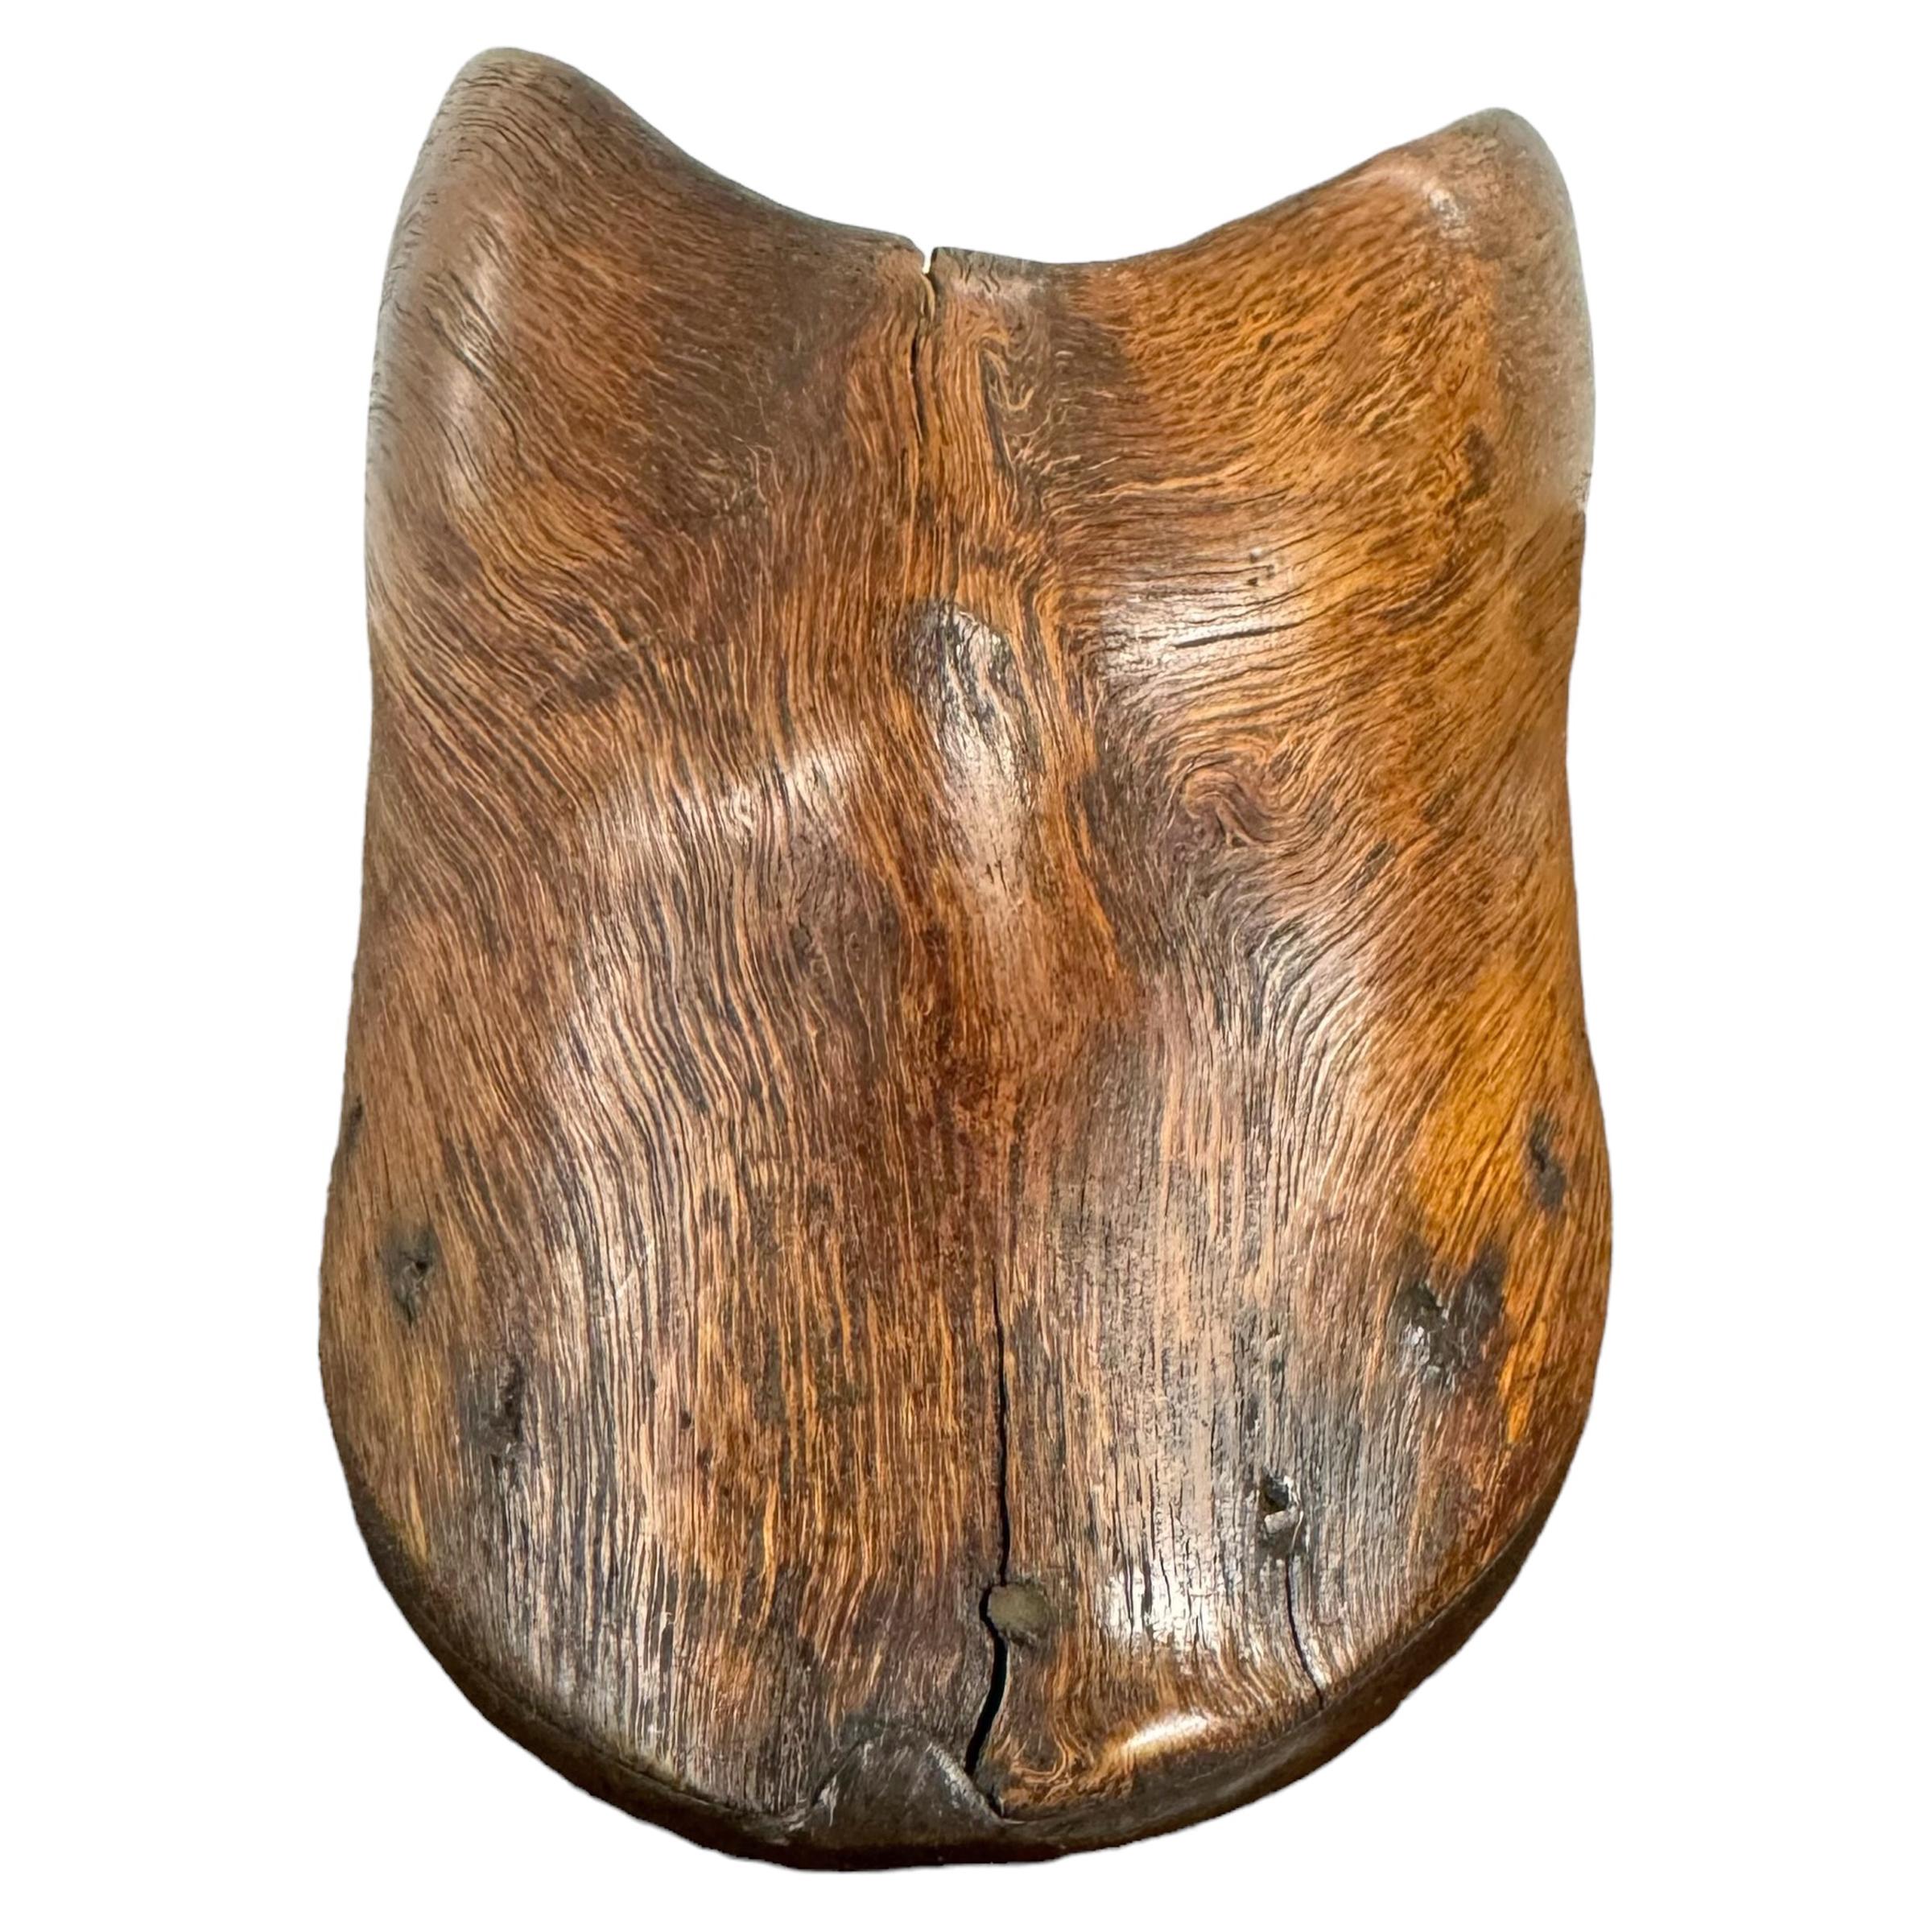 19th Century American Burl Wood Horse Hoof Vessel In Good Condition For Sale In Chicago, IL